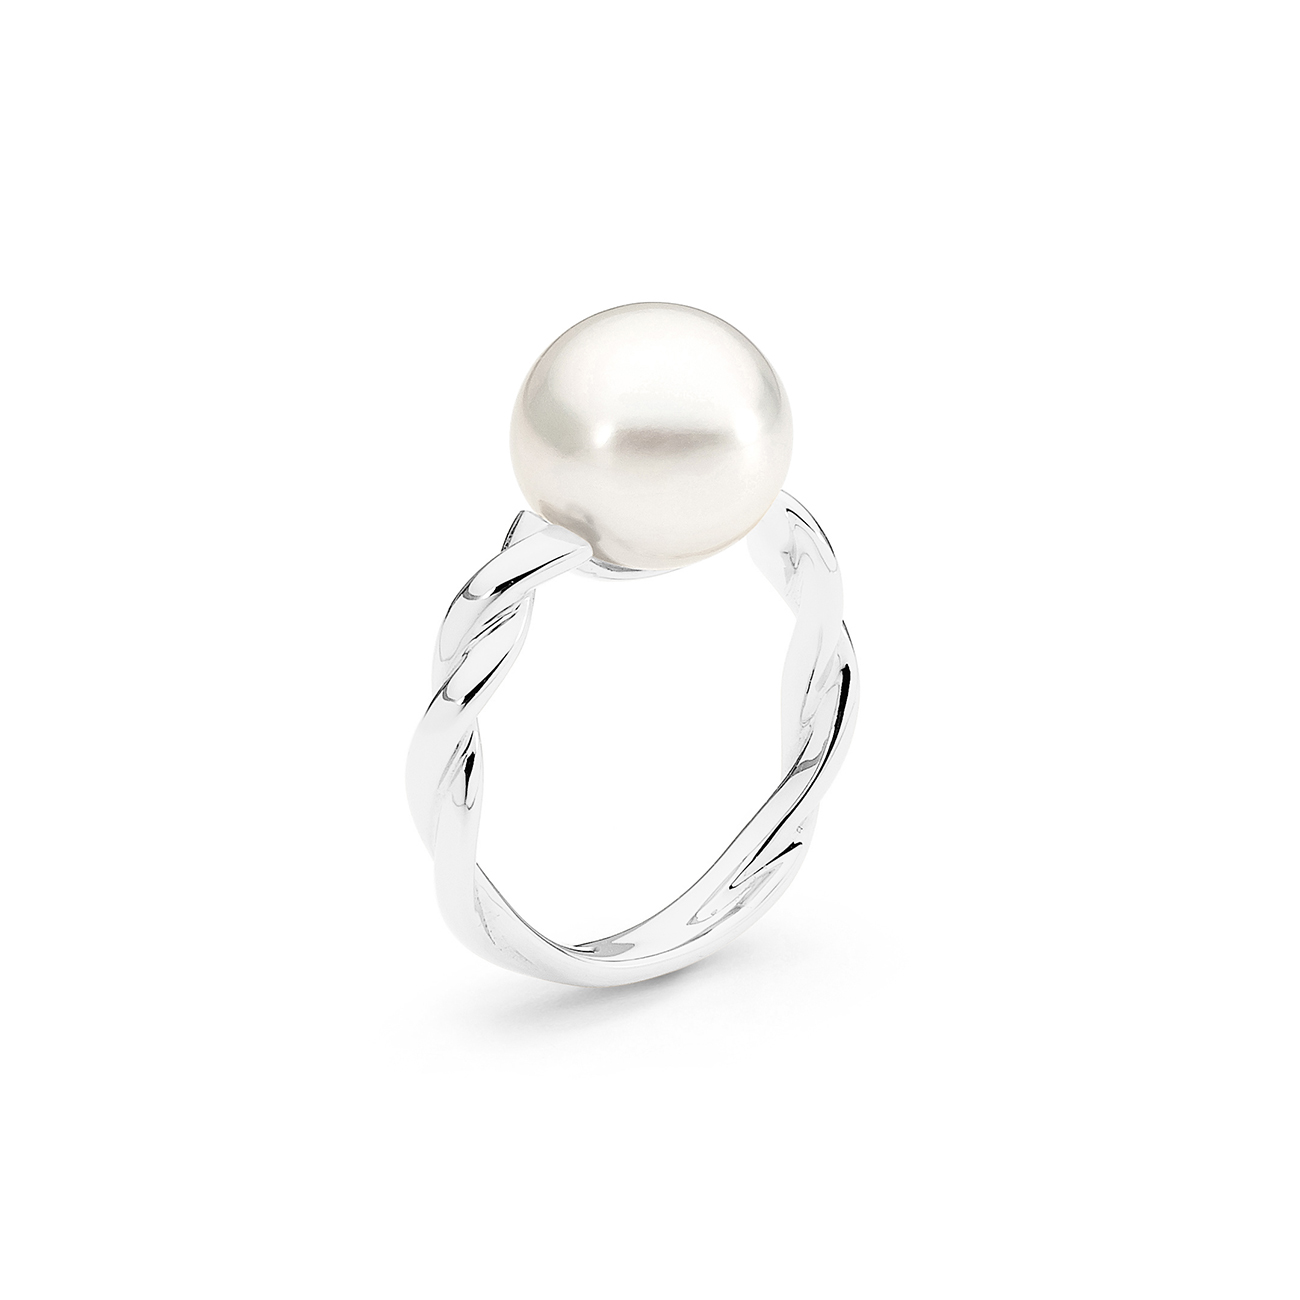 Allure South Sea Pearl Twisted Ring